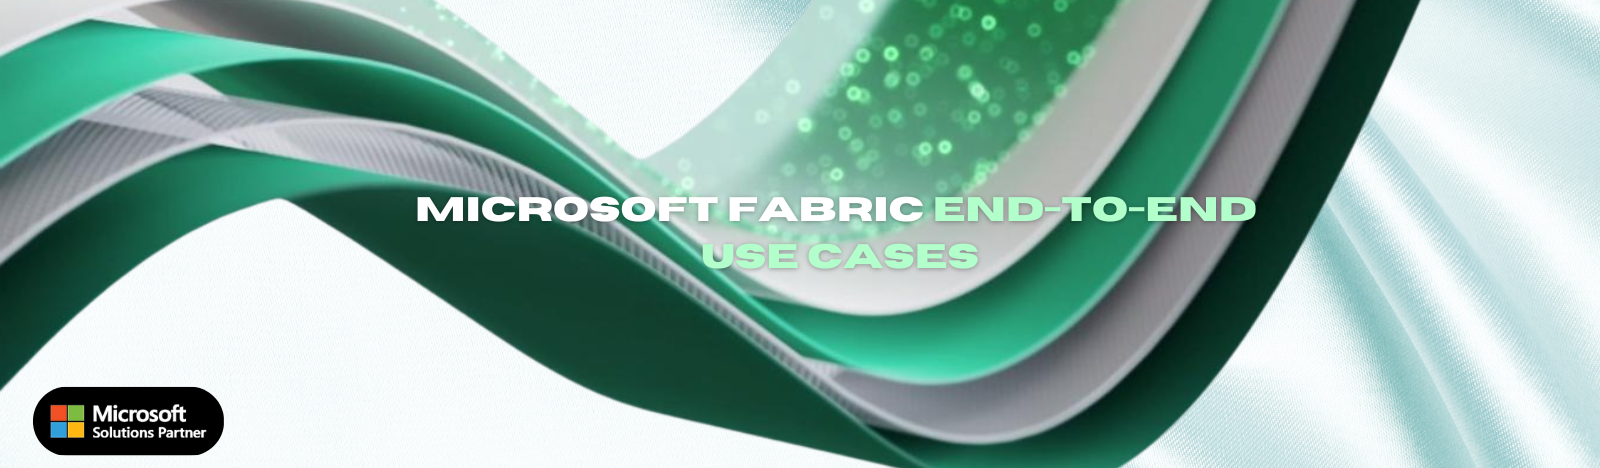 Practical Microsoft Fabric Use Cases Delivering Real Business Impact